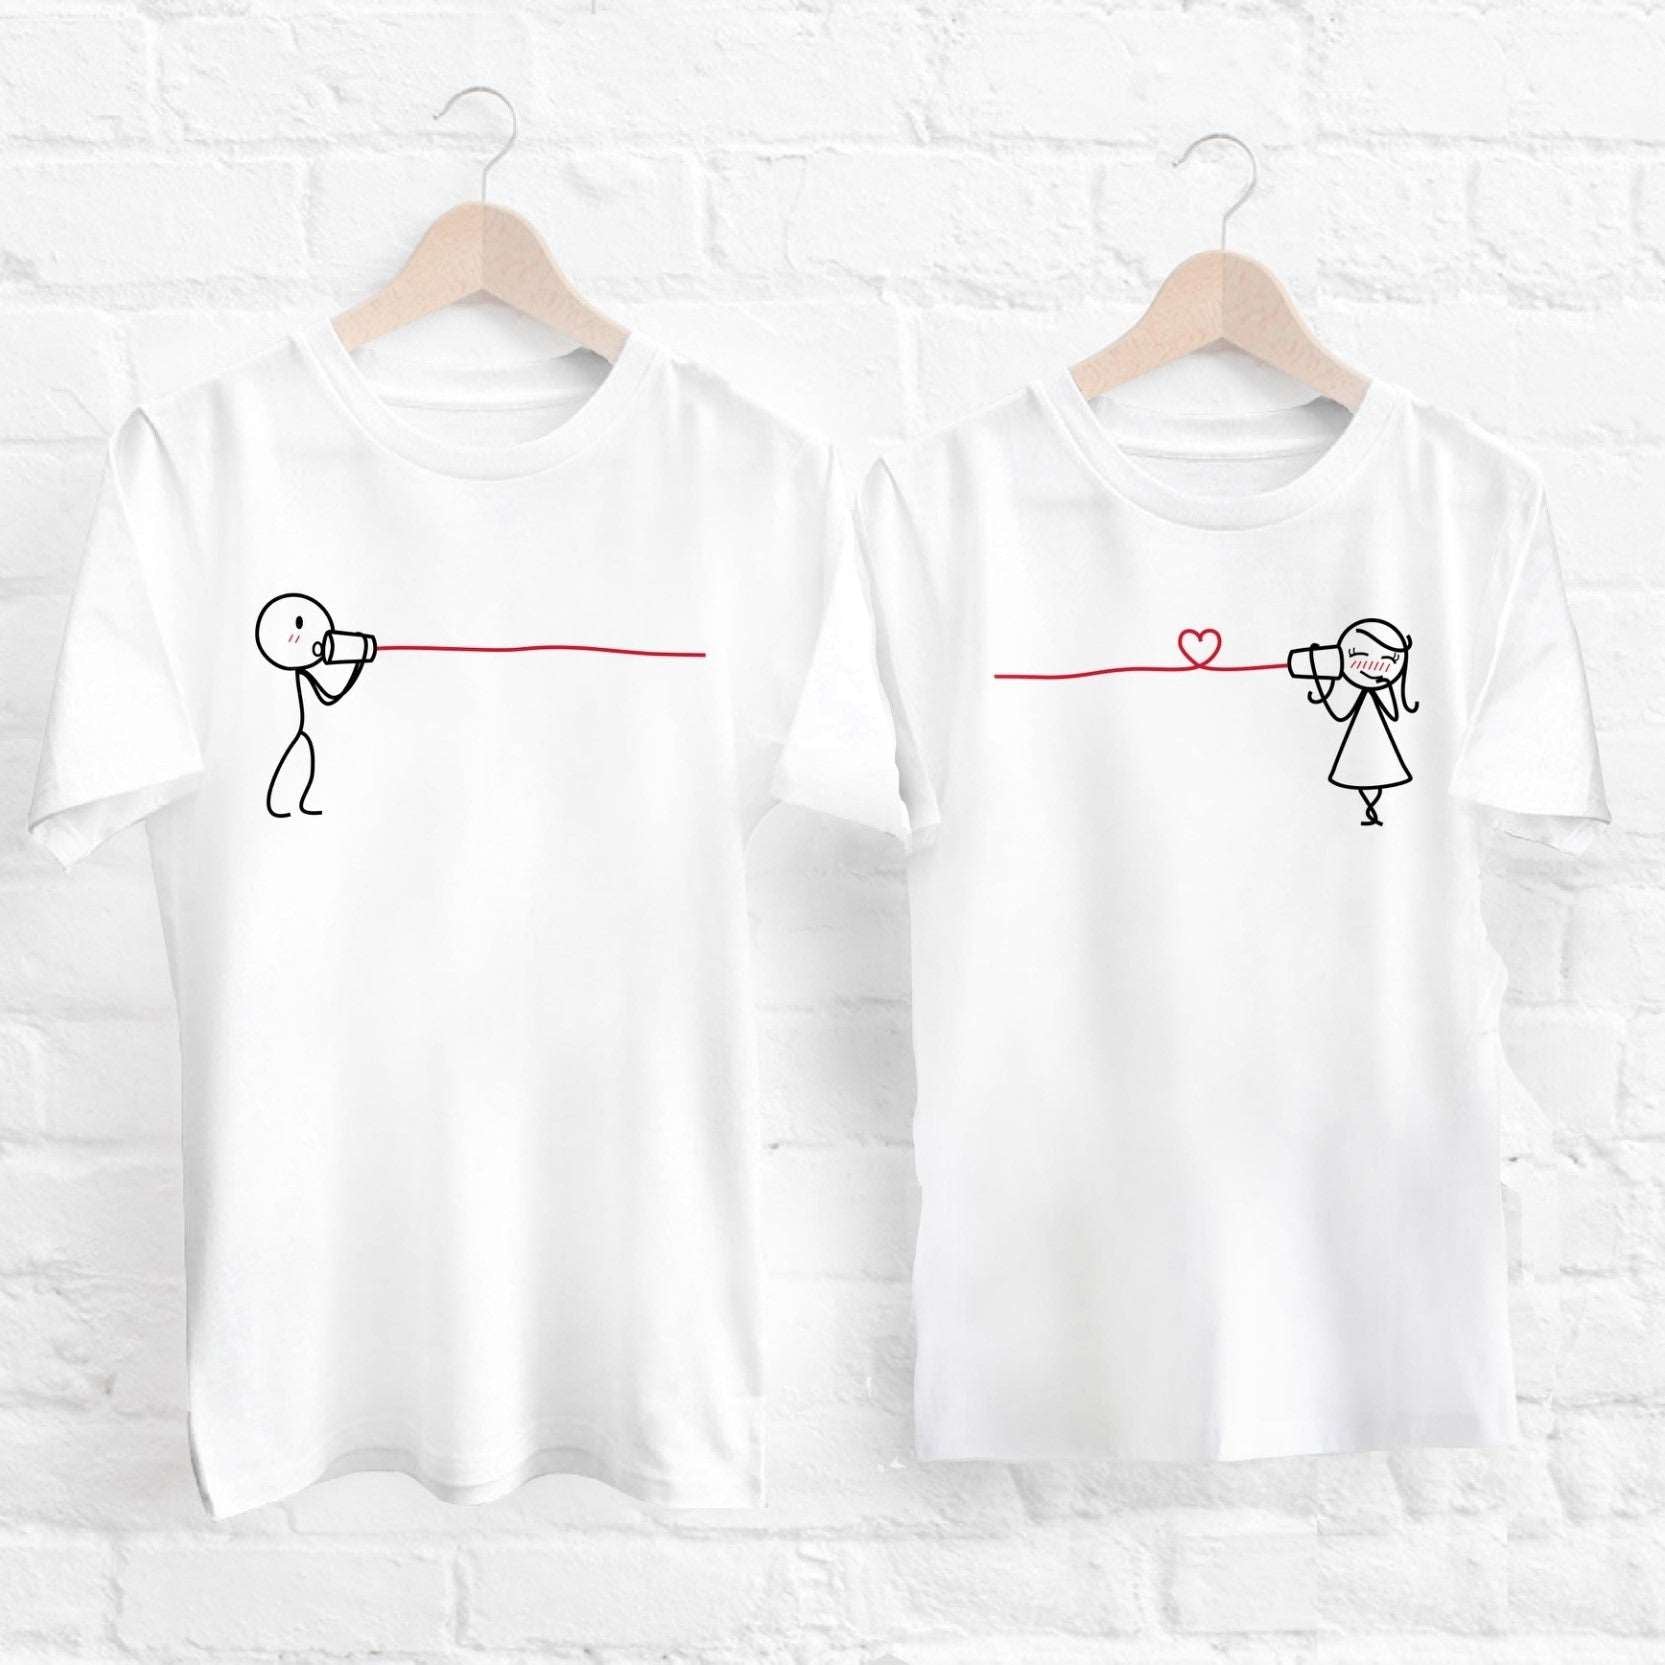 Surprise your loved ones with a pair of artistic white shirts, perfect for couples and as anniversary gifts.